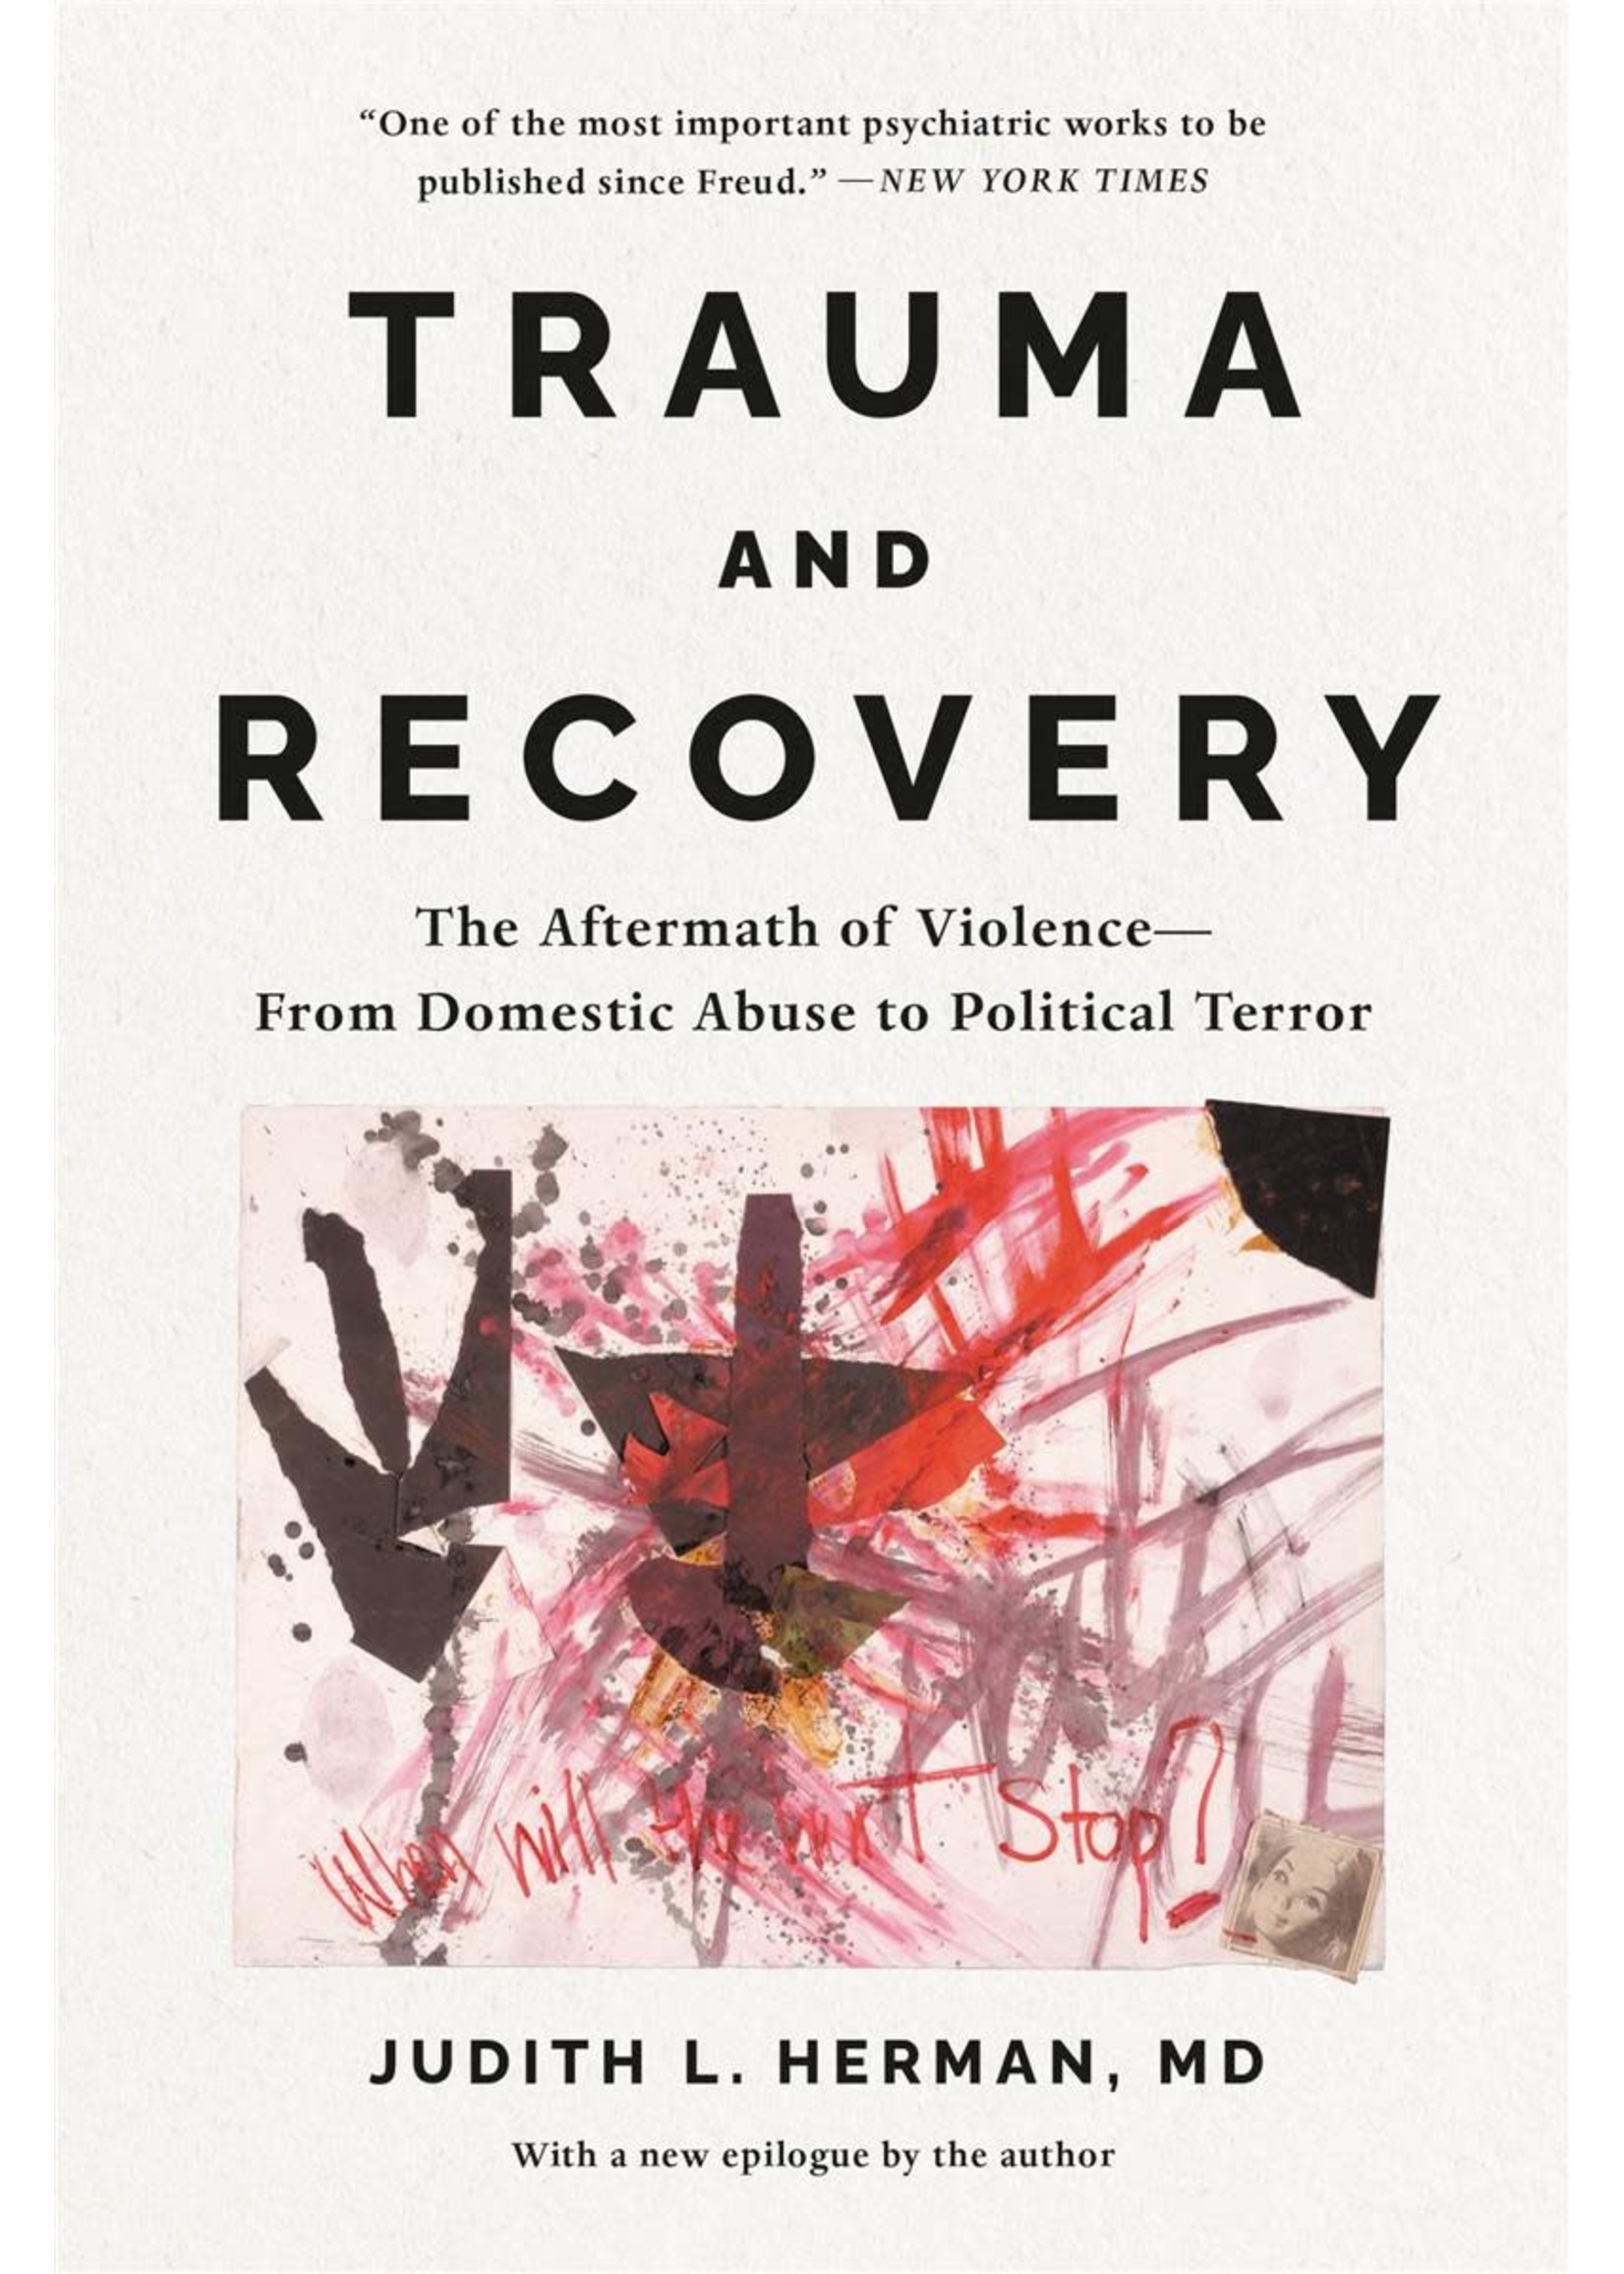 Trauma and Recovery: The Aftermath of Violence--from Domestic Abuse to Political Terror by Judith Lewis Herman MD